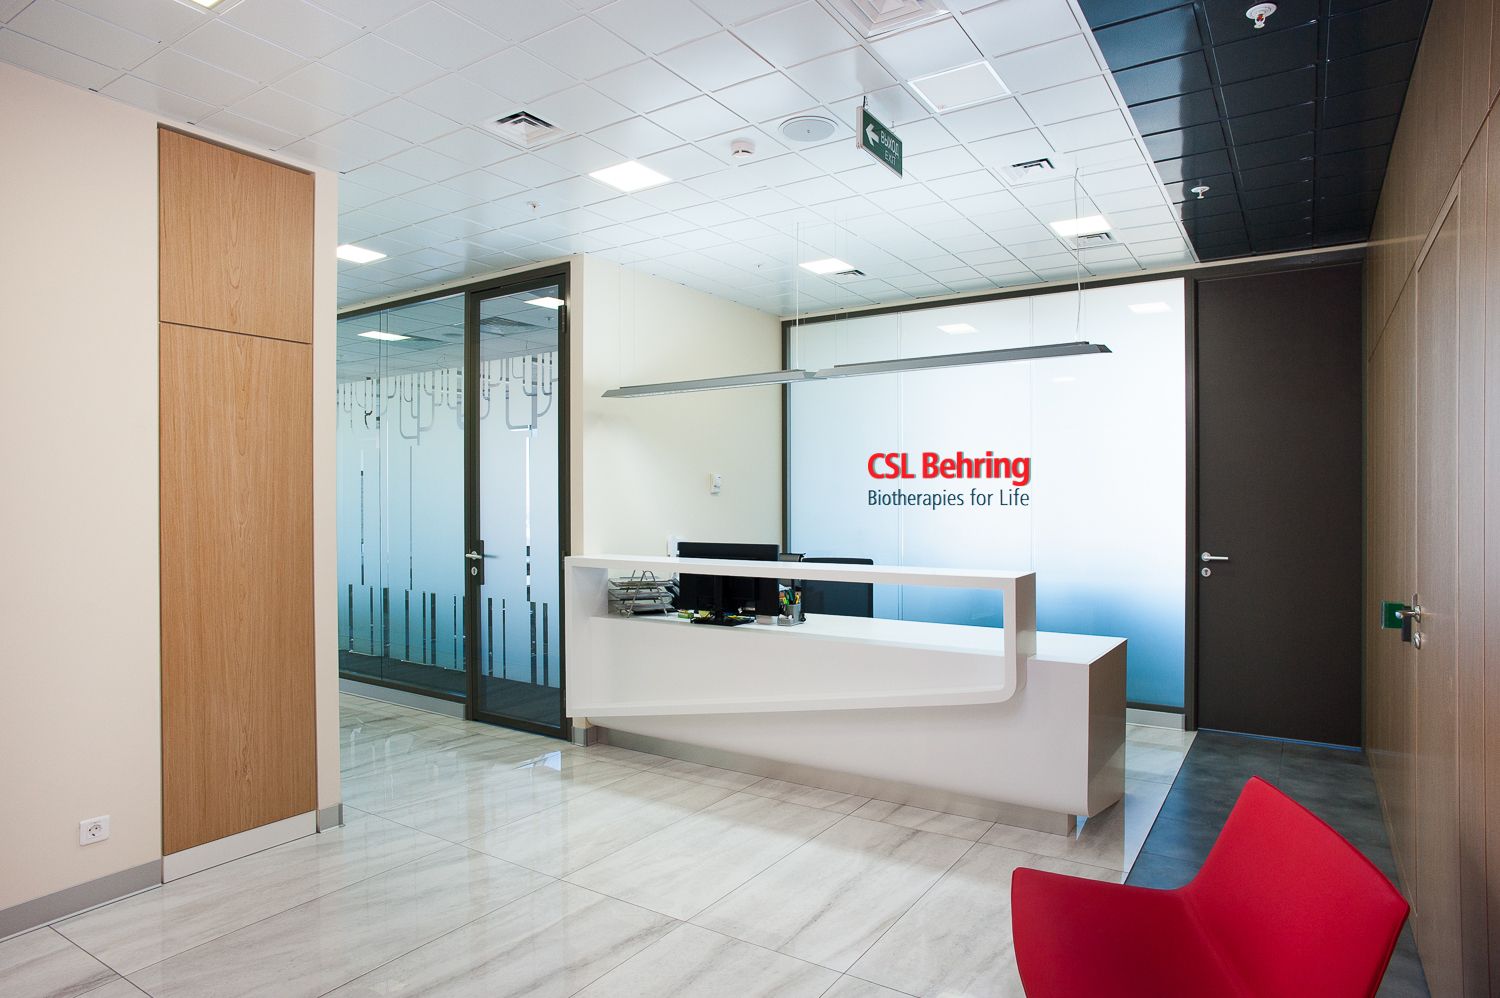 Photo NAYADA for the office of the CSL Behring Pharmaceutical Company